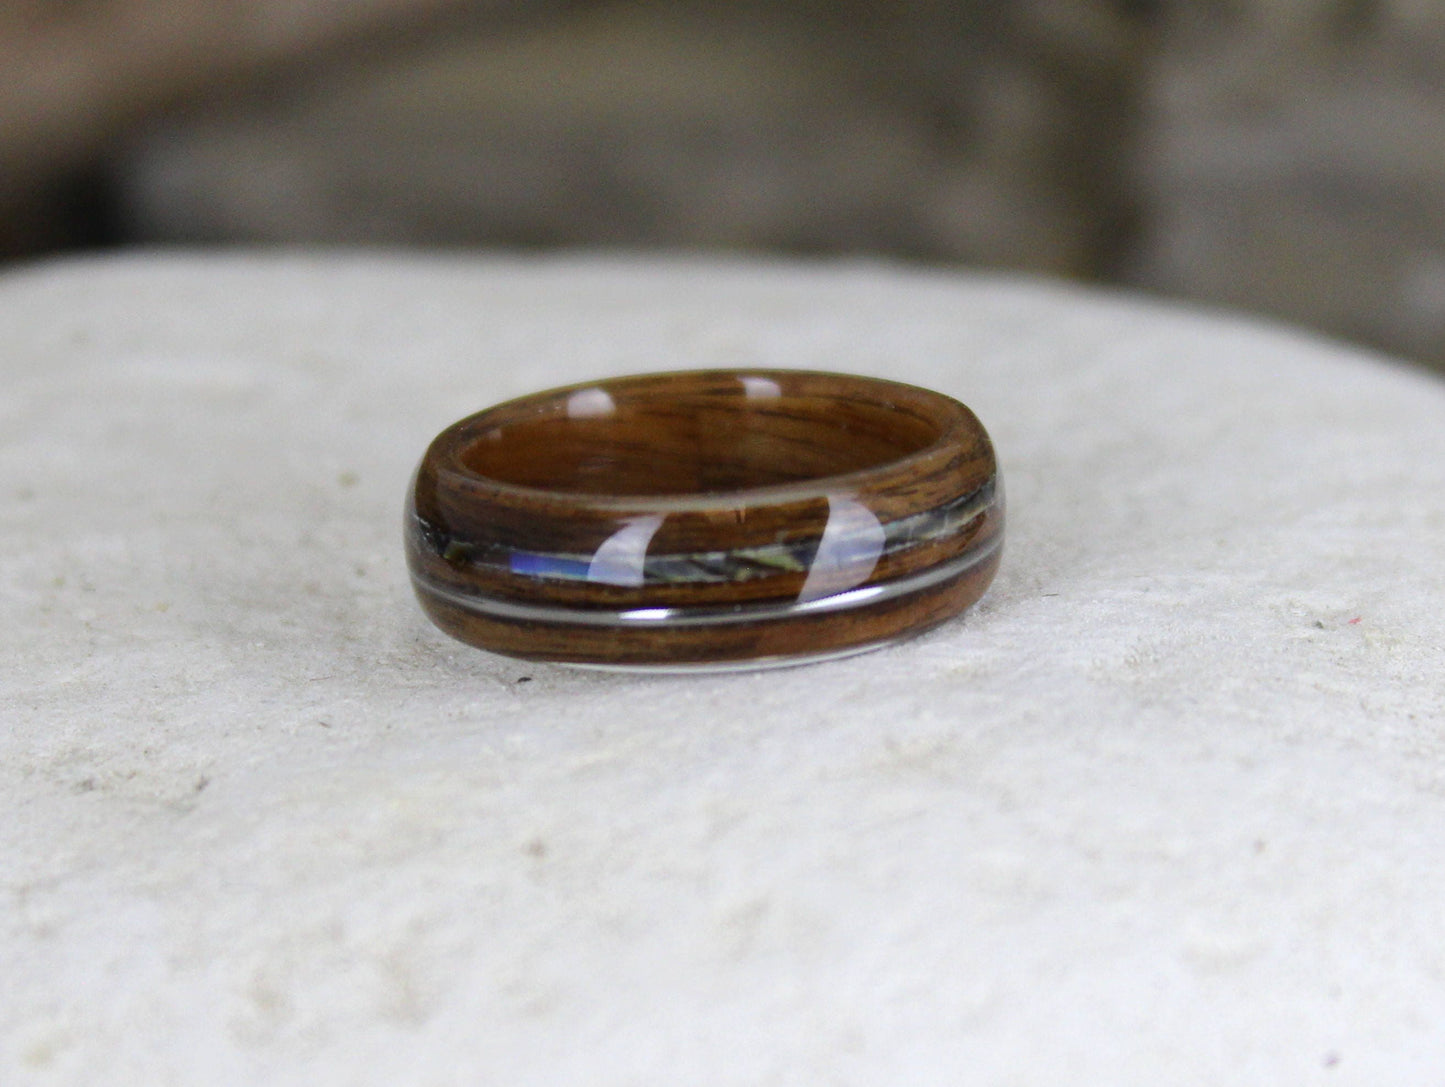 Rosewood with Guitar String & Abalone Bent Wood Ring